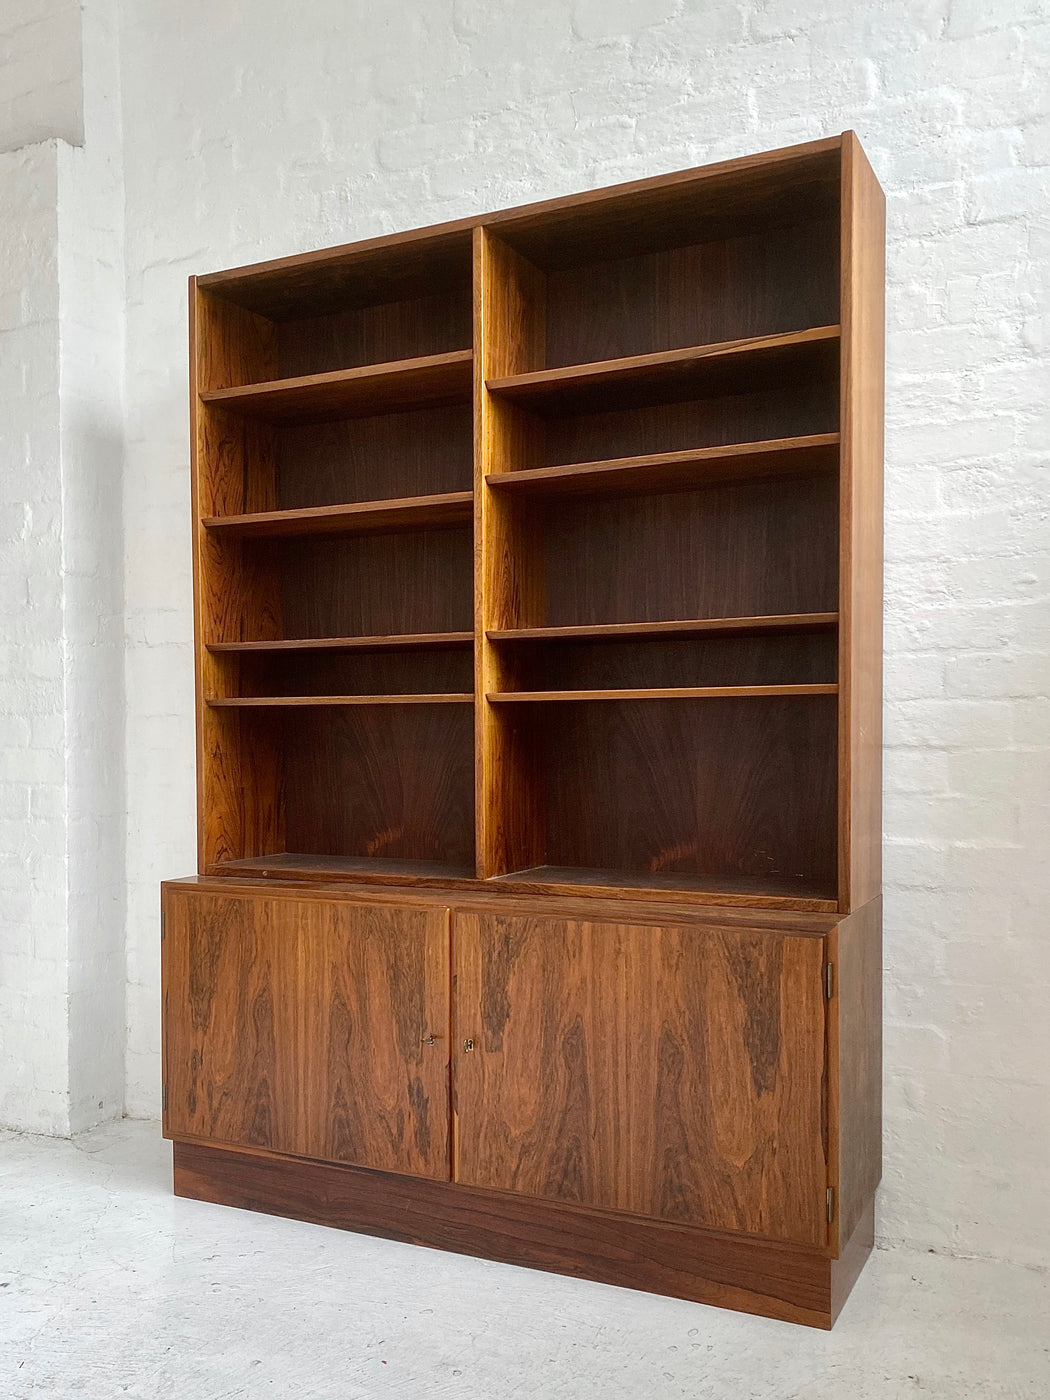 Gunni Omann Rosewood Bookcase (Top) Section